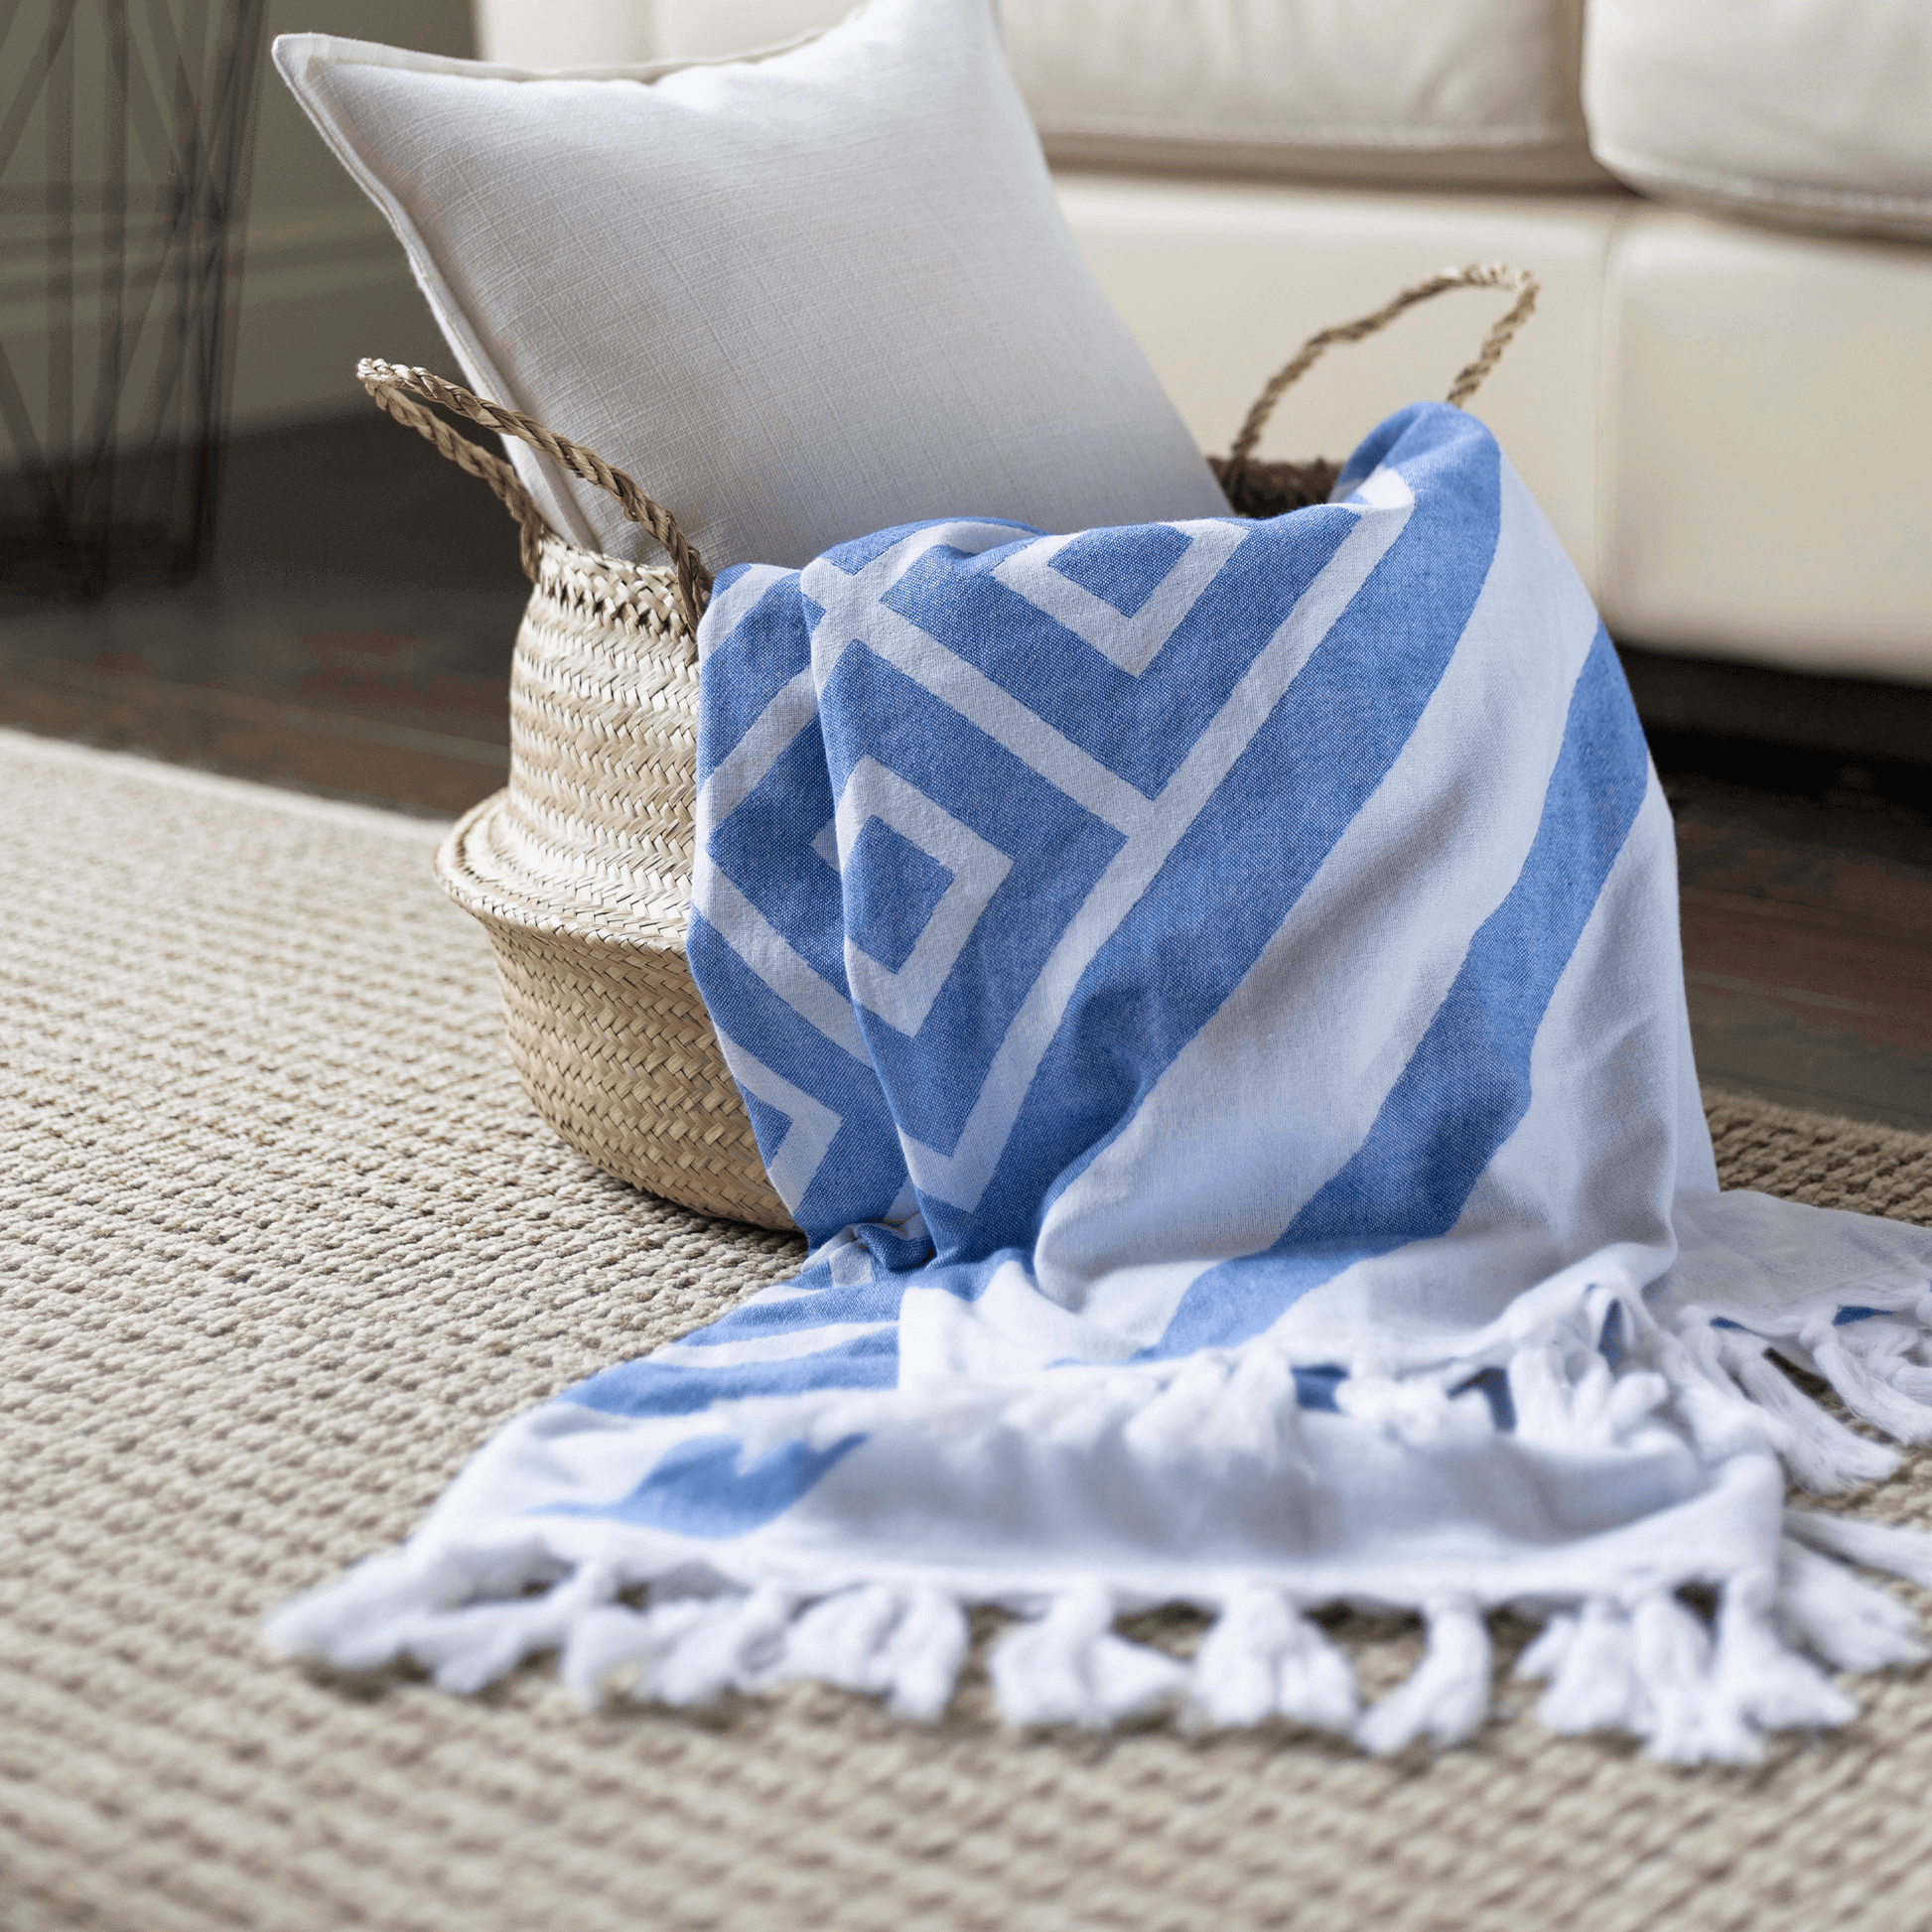 White and blue Turkish towel in the livingroom decore